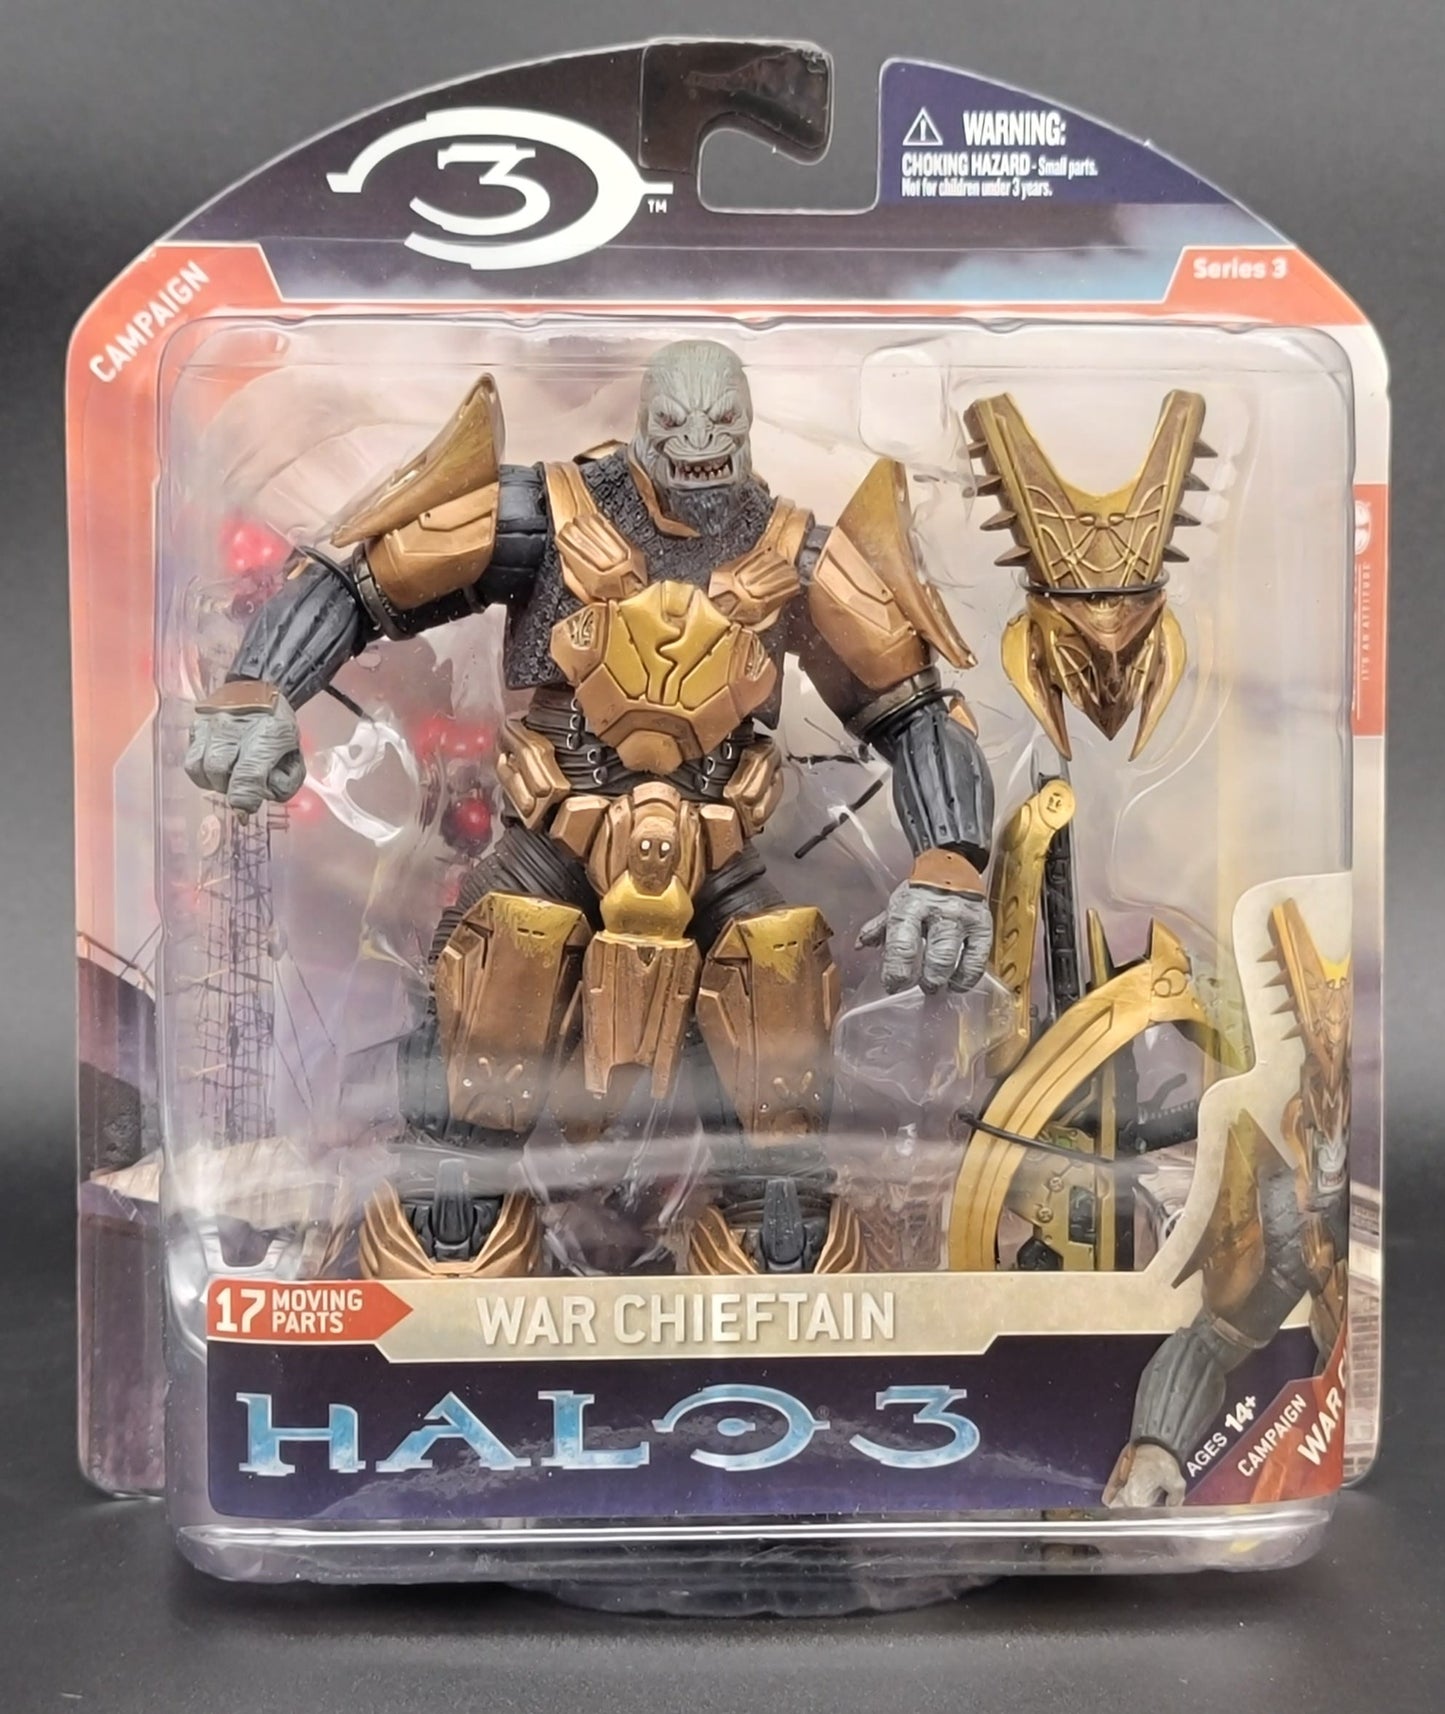 War Chieftain Halo 3 campaign series 3